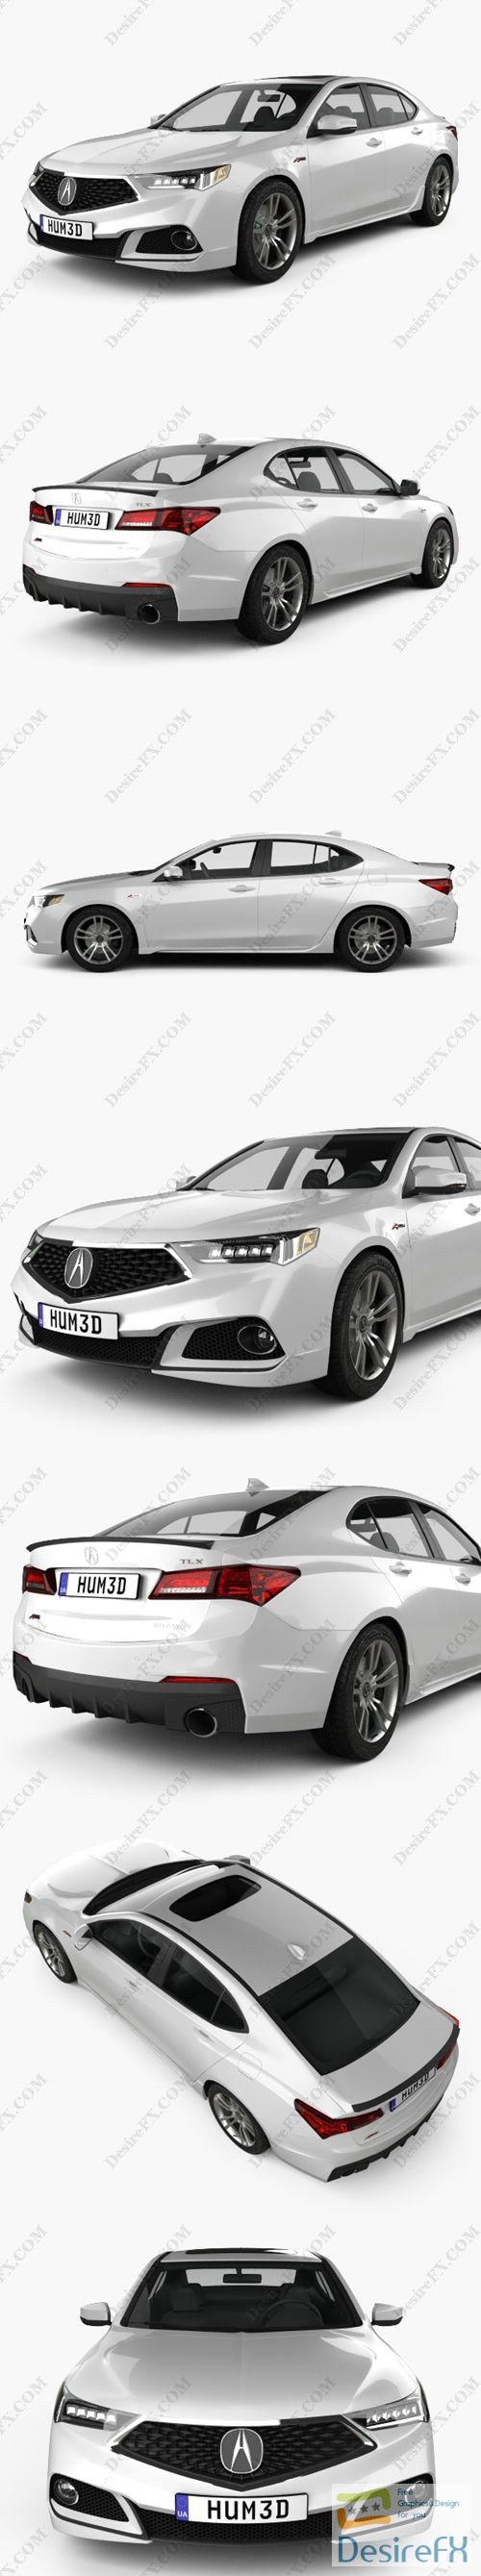 Acura TLX A-Spec 2017 3D Model